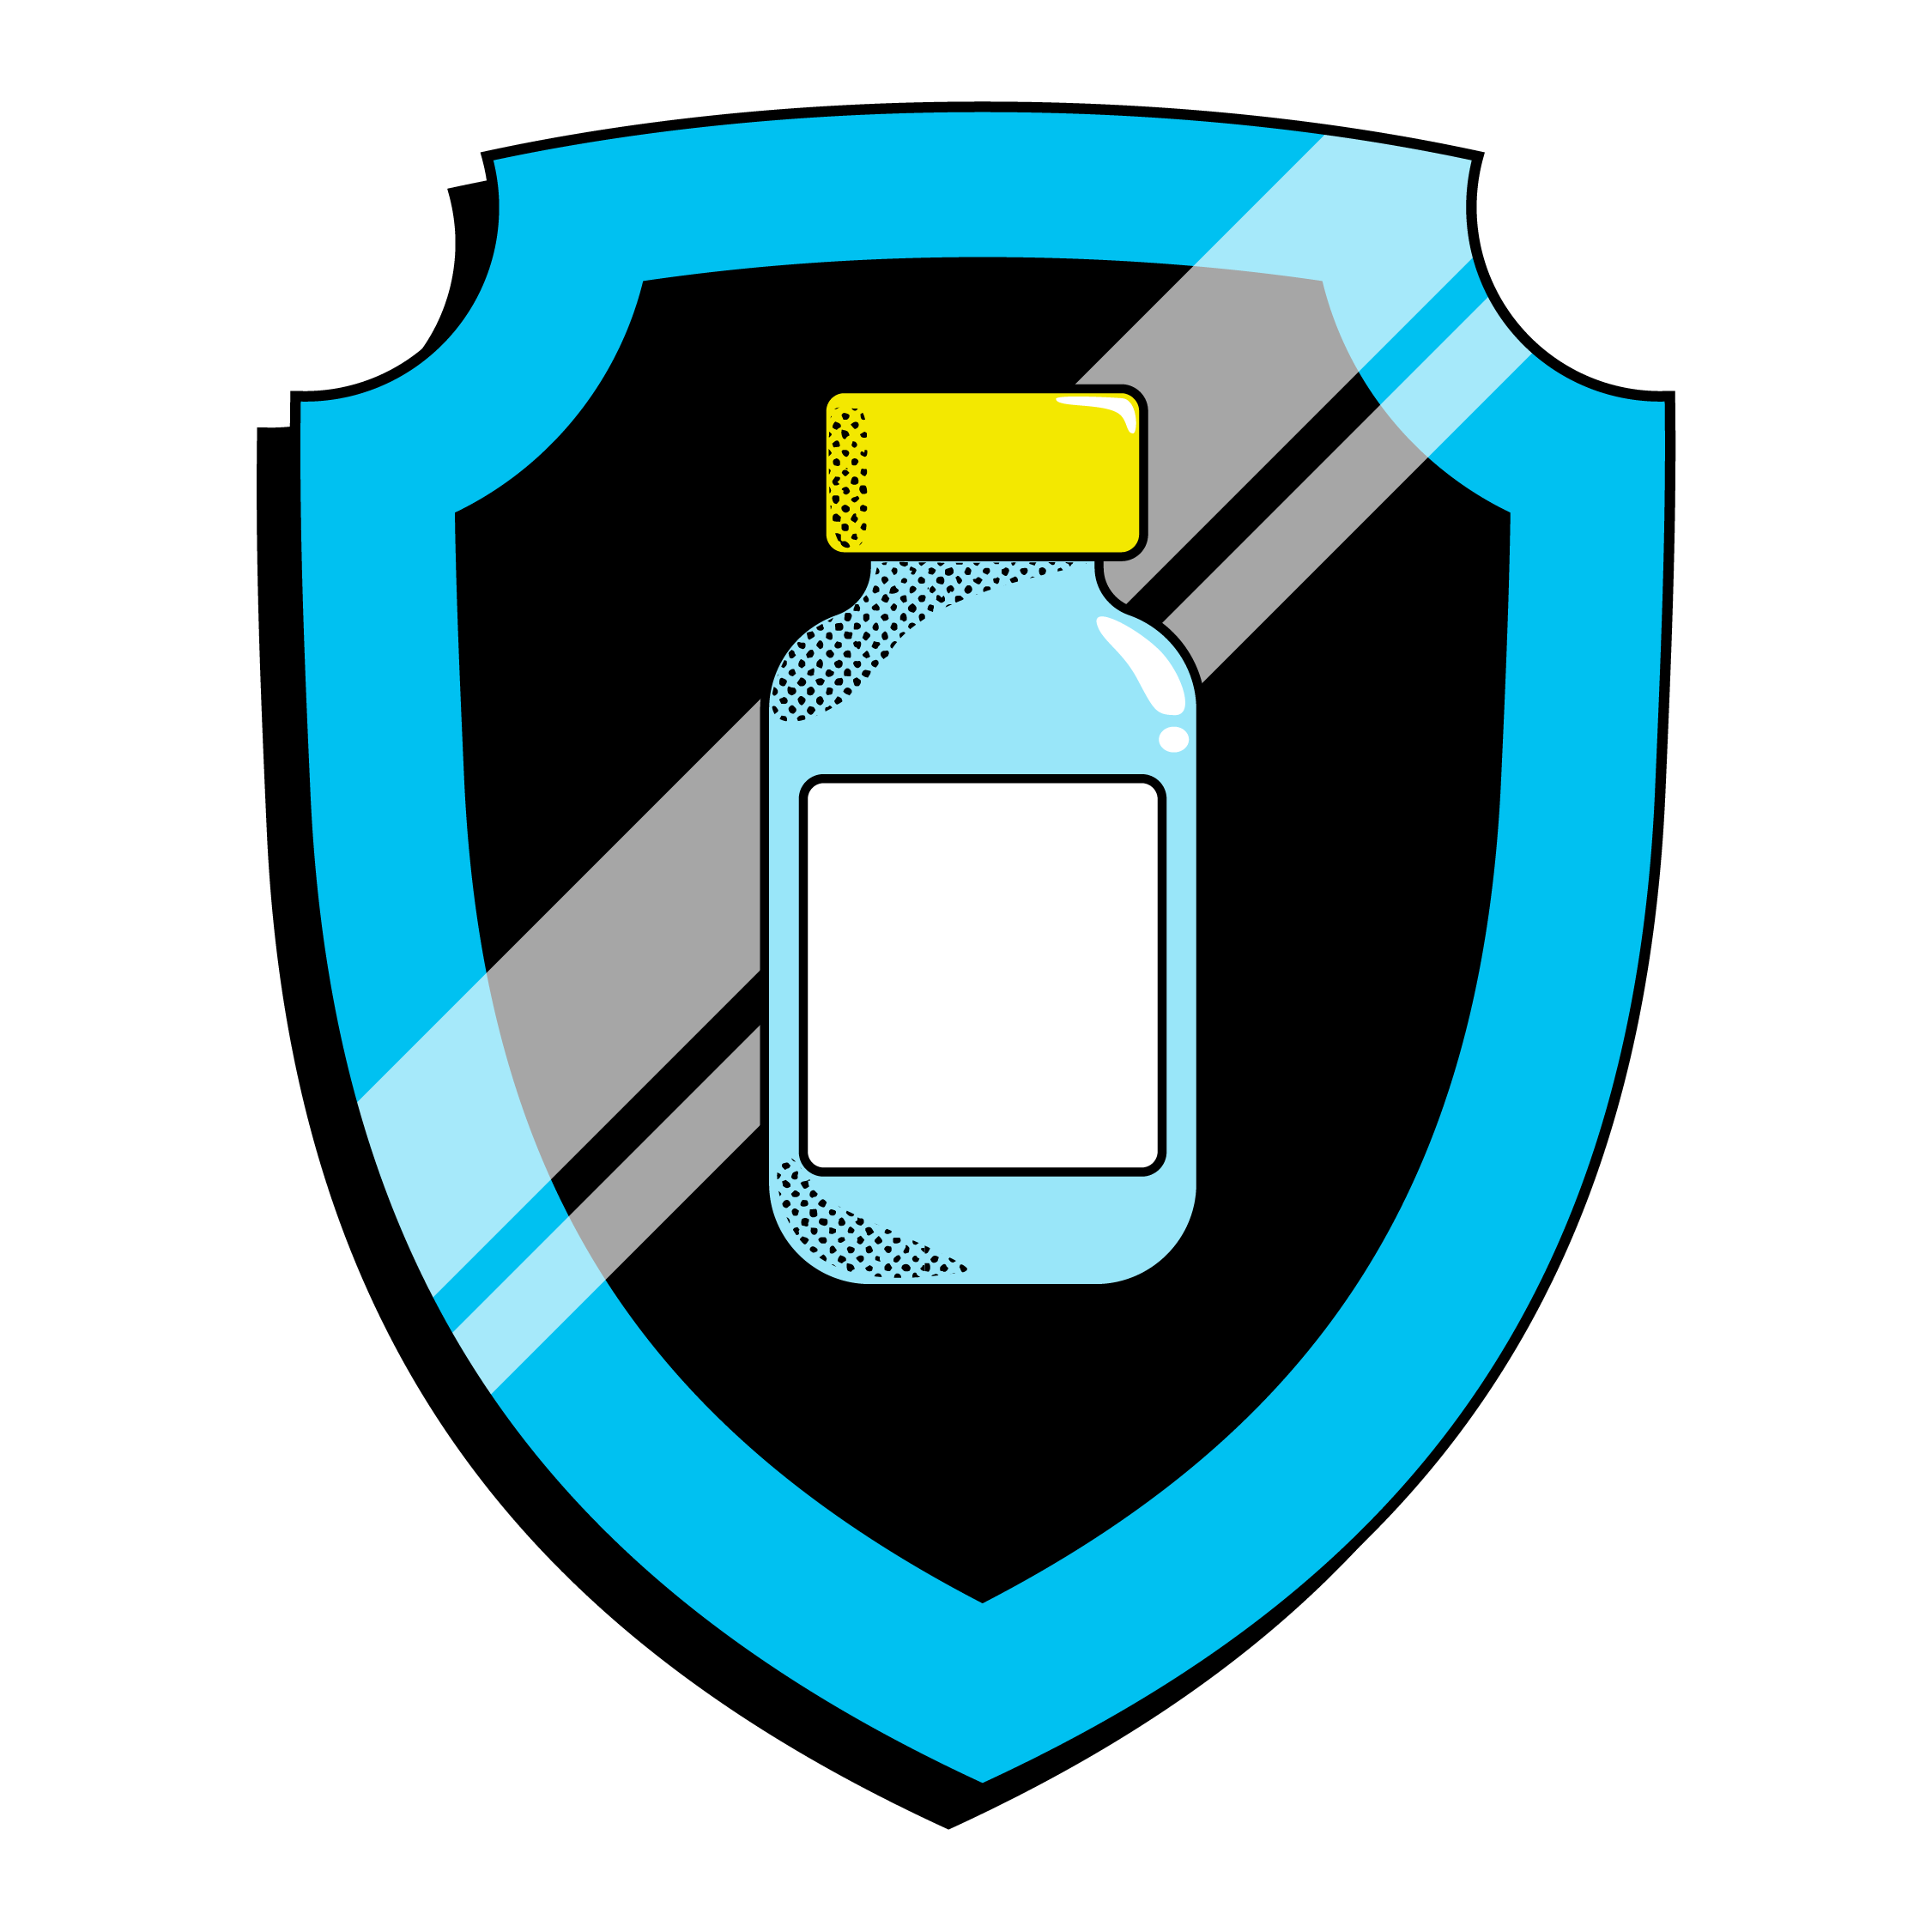 Illustration of blue vaccination vial in a blue badge with black background.